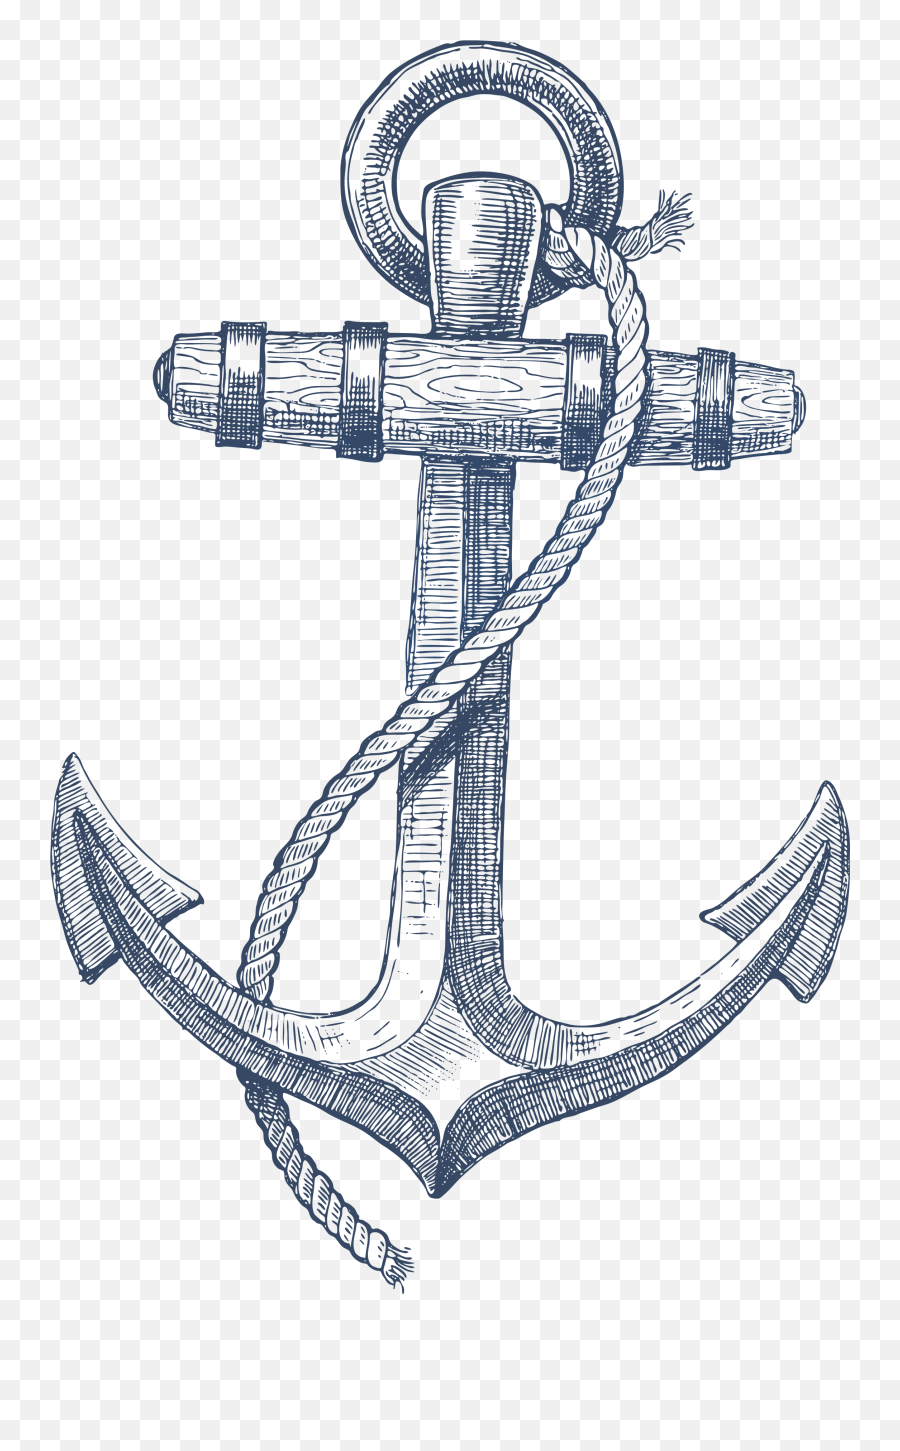 Download Anchor Png Image For Free - Ship Anchor Drawing,Anchor Png